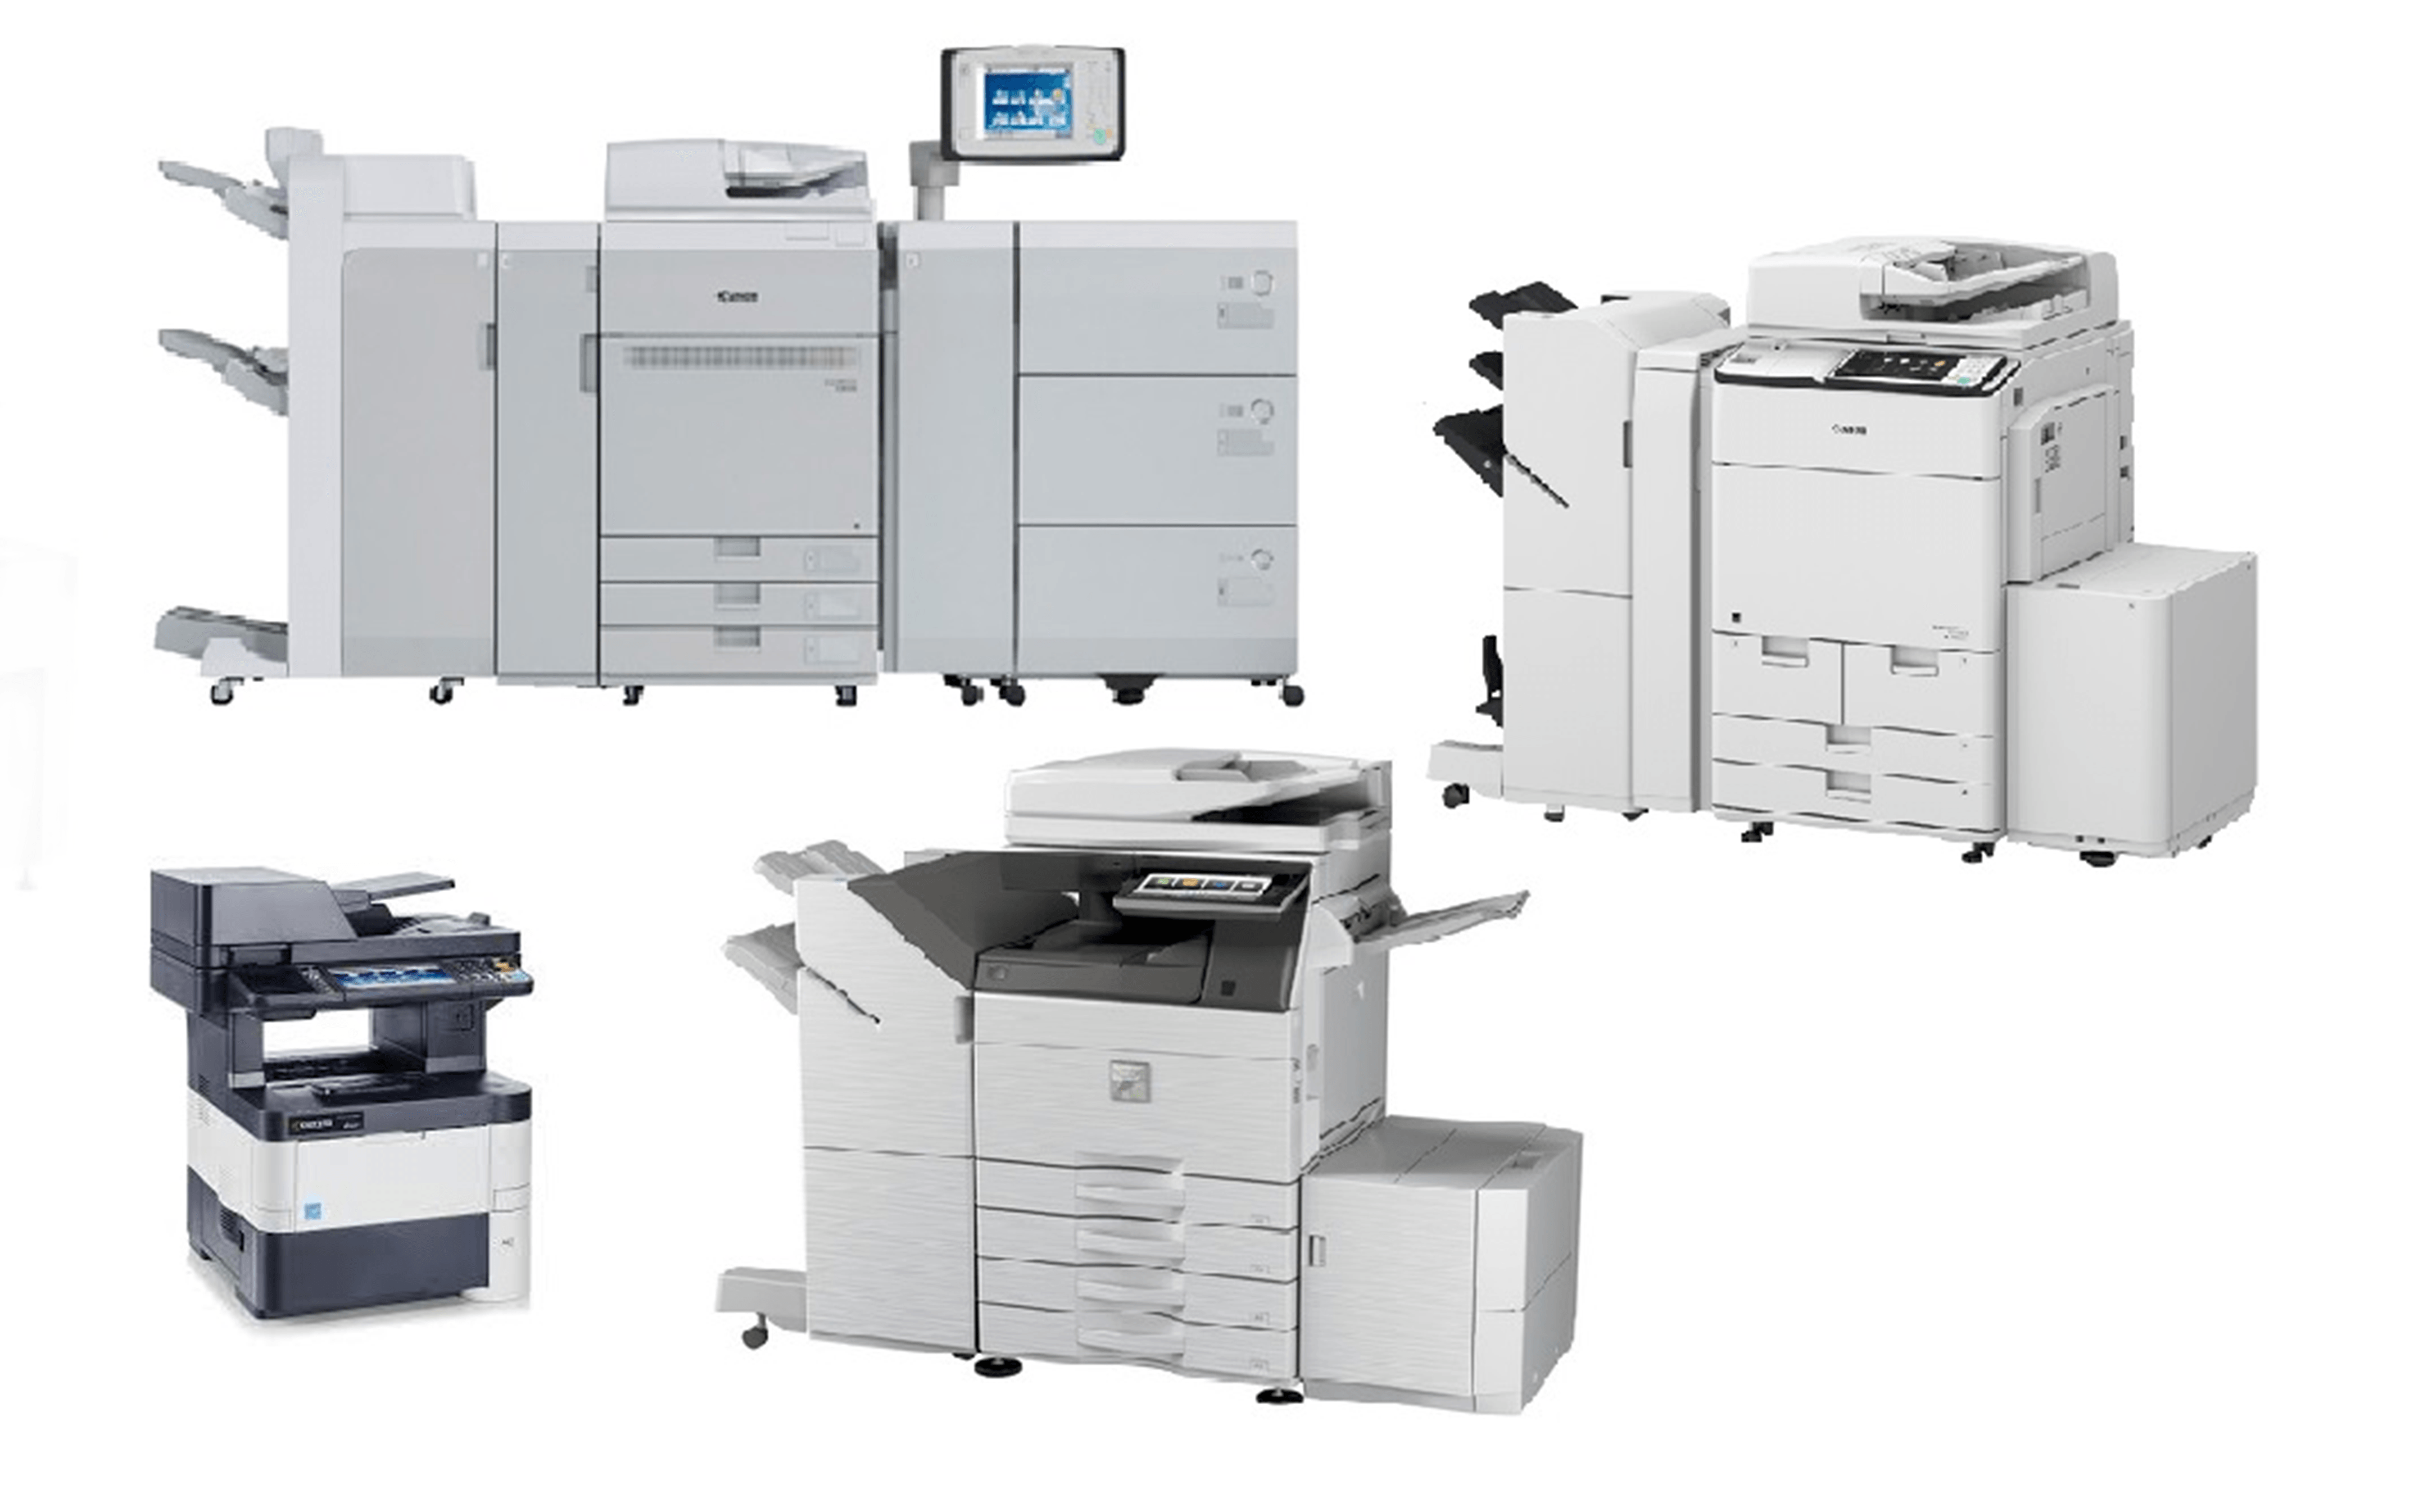 What is a Multifunction Printer? 100 Words]